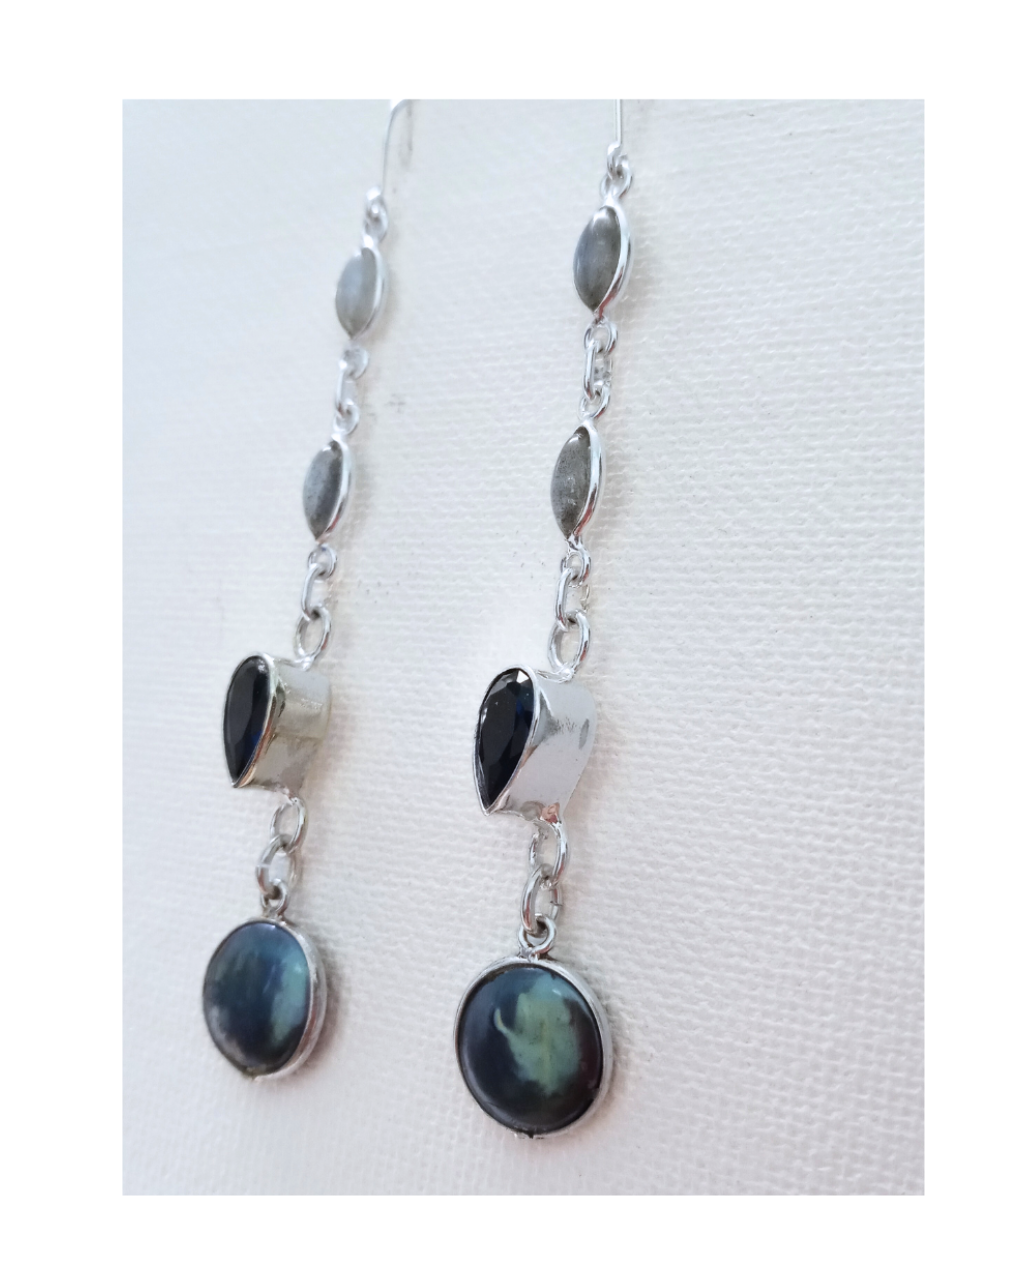 Exclusive Sterling Dangle Earrings with Labradorite, Agate and Coin Pearl Drops 3 5/16"L X 1/2"W. ONE ONLY.